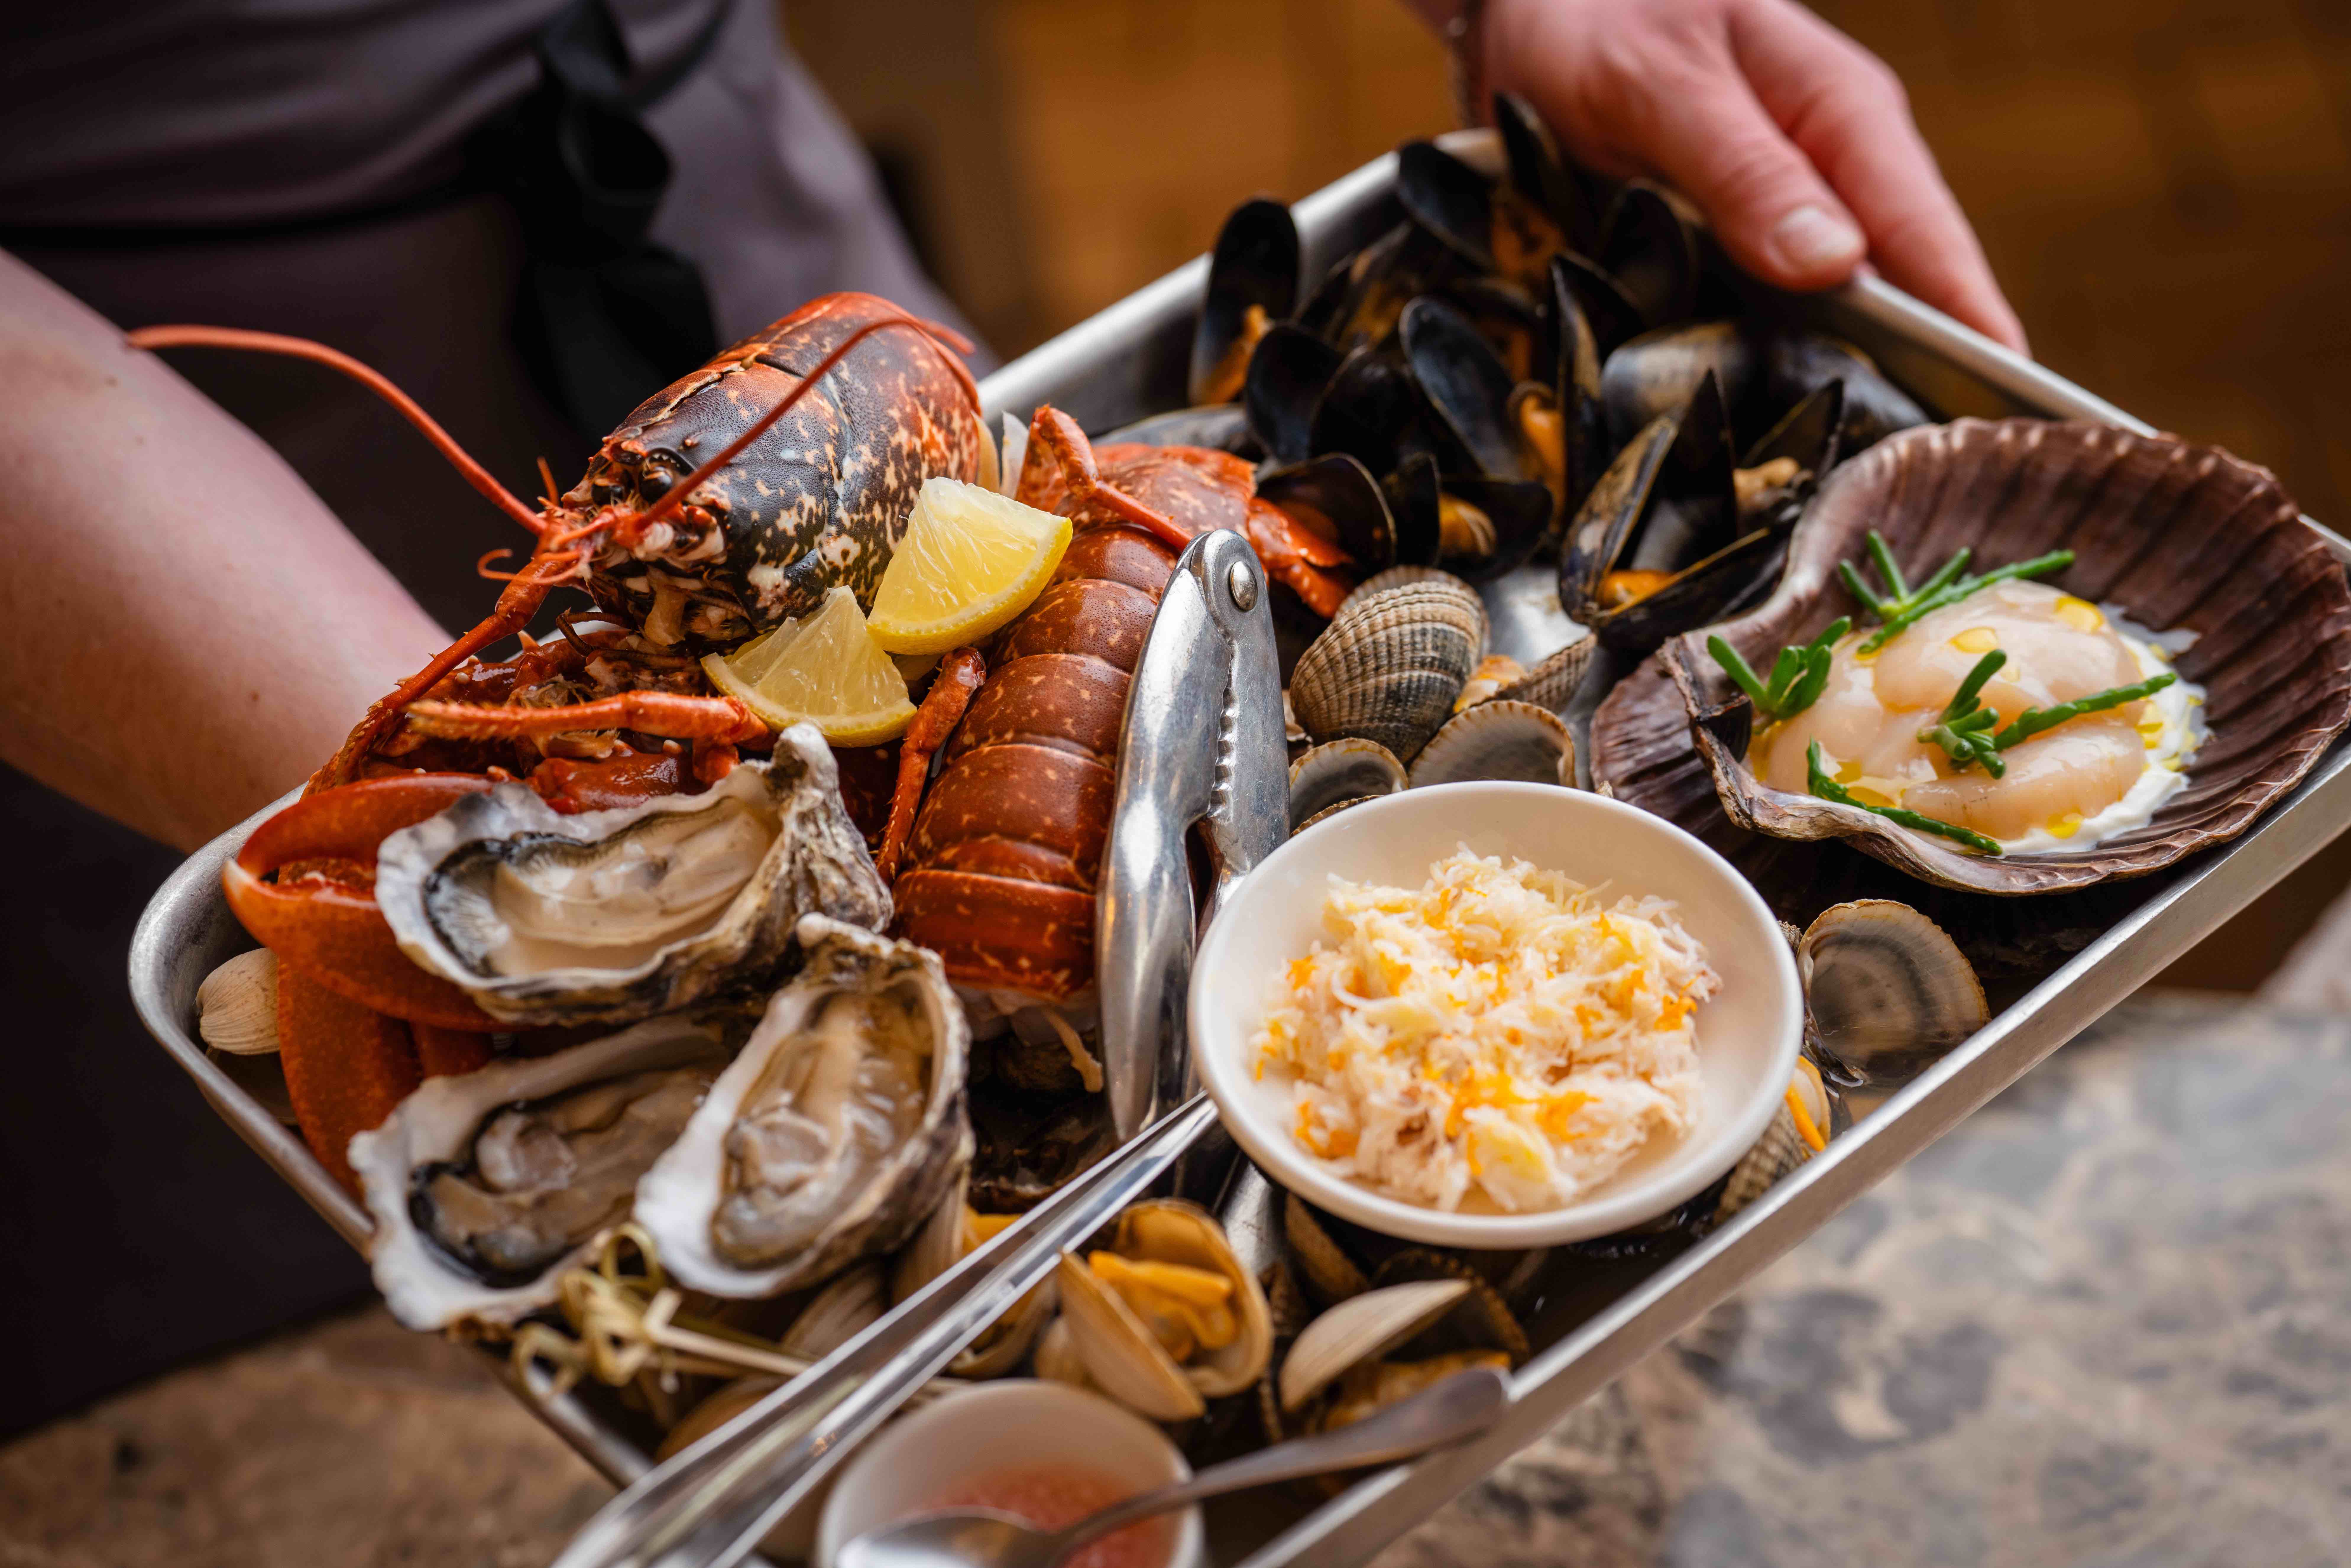 Selection of shellfish including lobster, oysters, clams, whales & mussels. on a nickel tray and held by a smartly dressed team member.